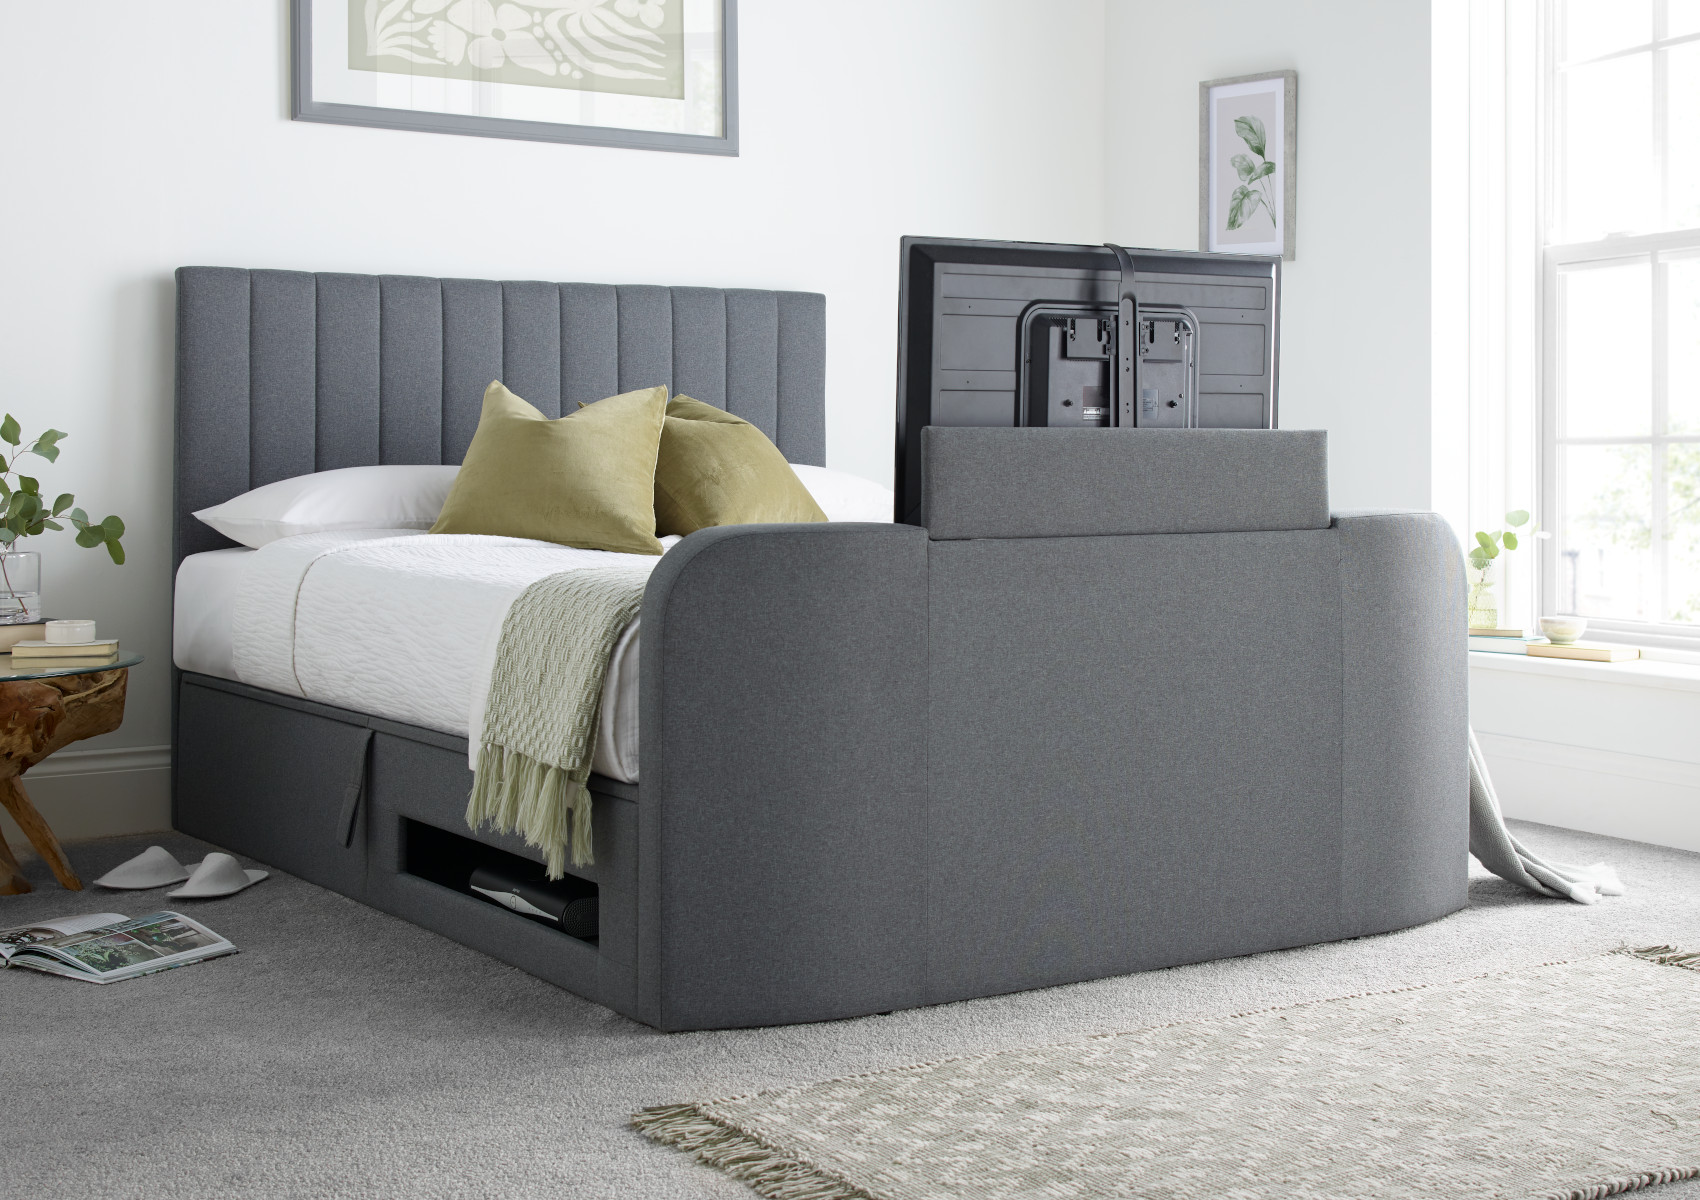 View Onelife Seal Grey Upholstered TV Ottoman Bed Frame Time4Sleep information